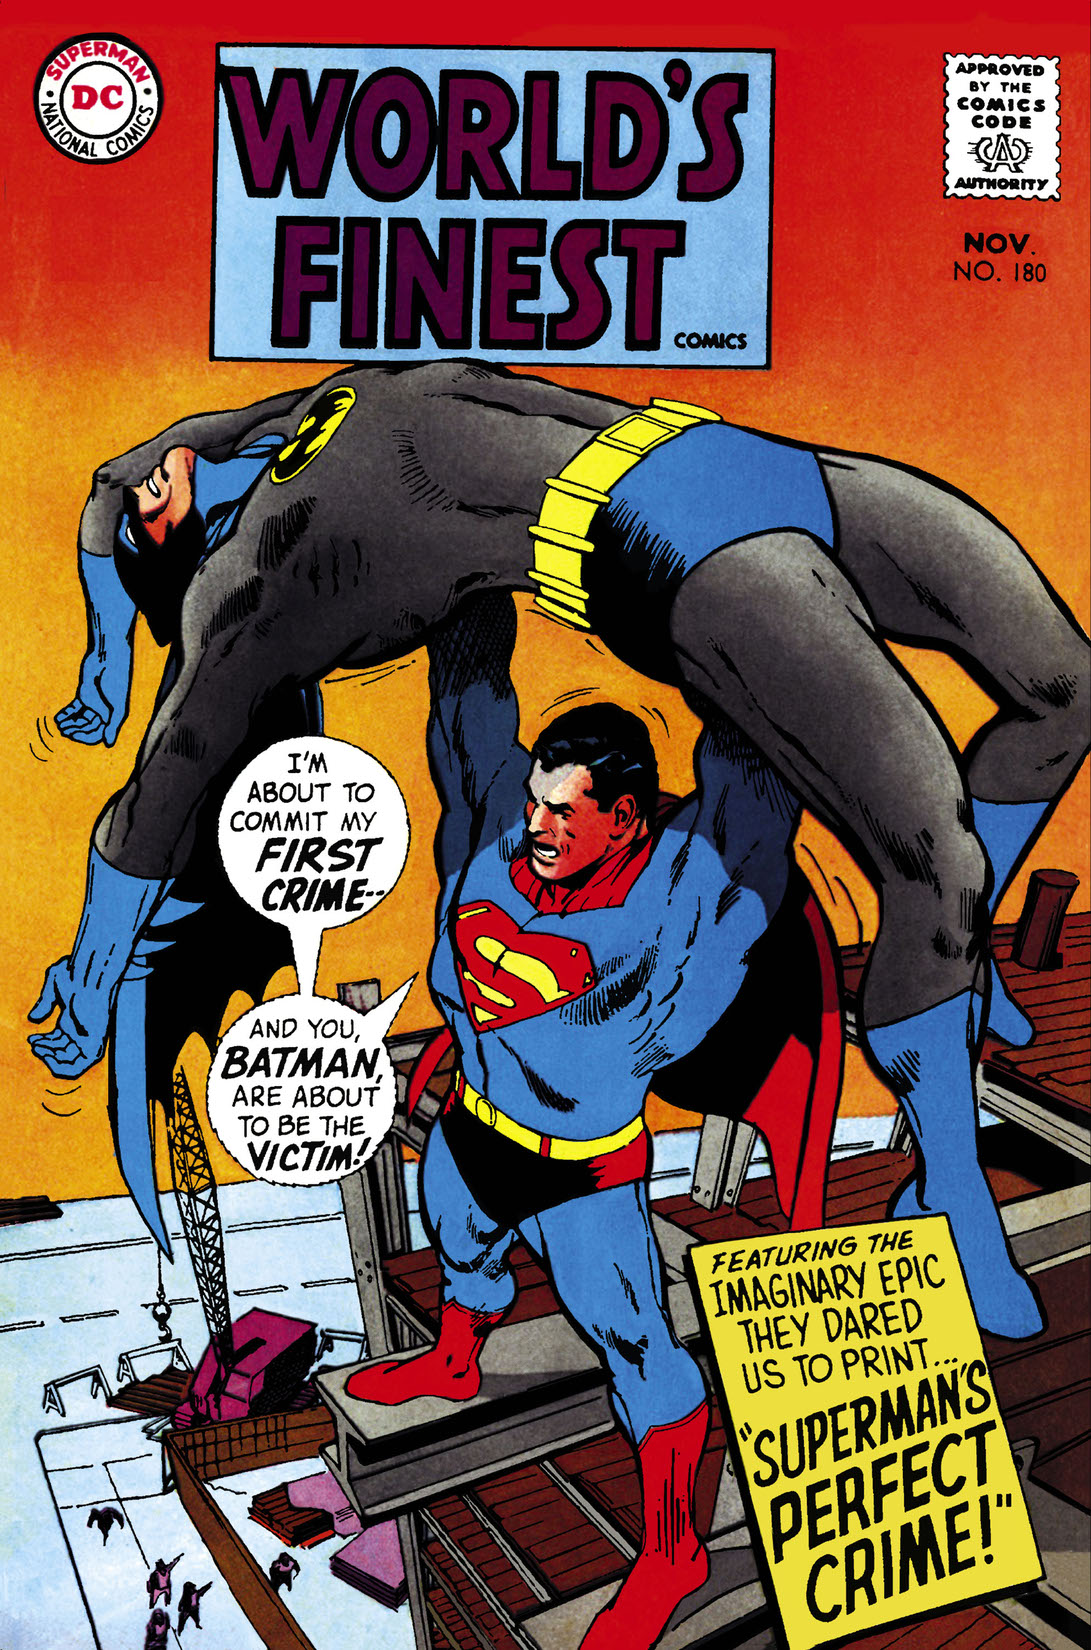 World's Finest Comics (1941-) #180 preview images